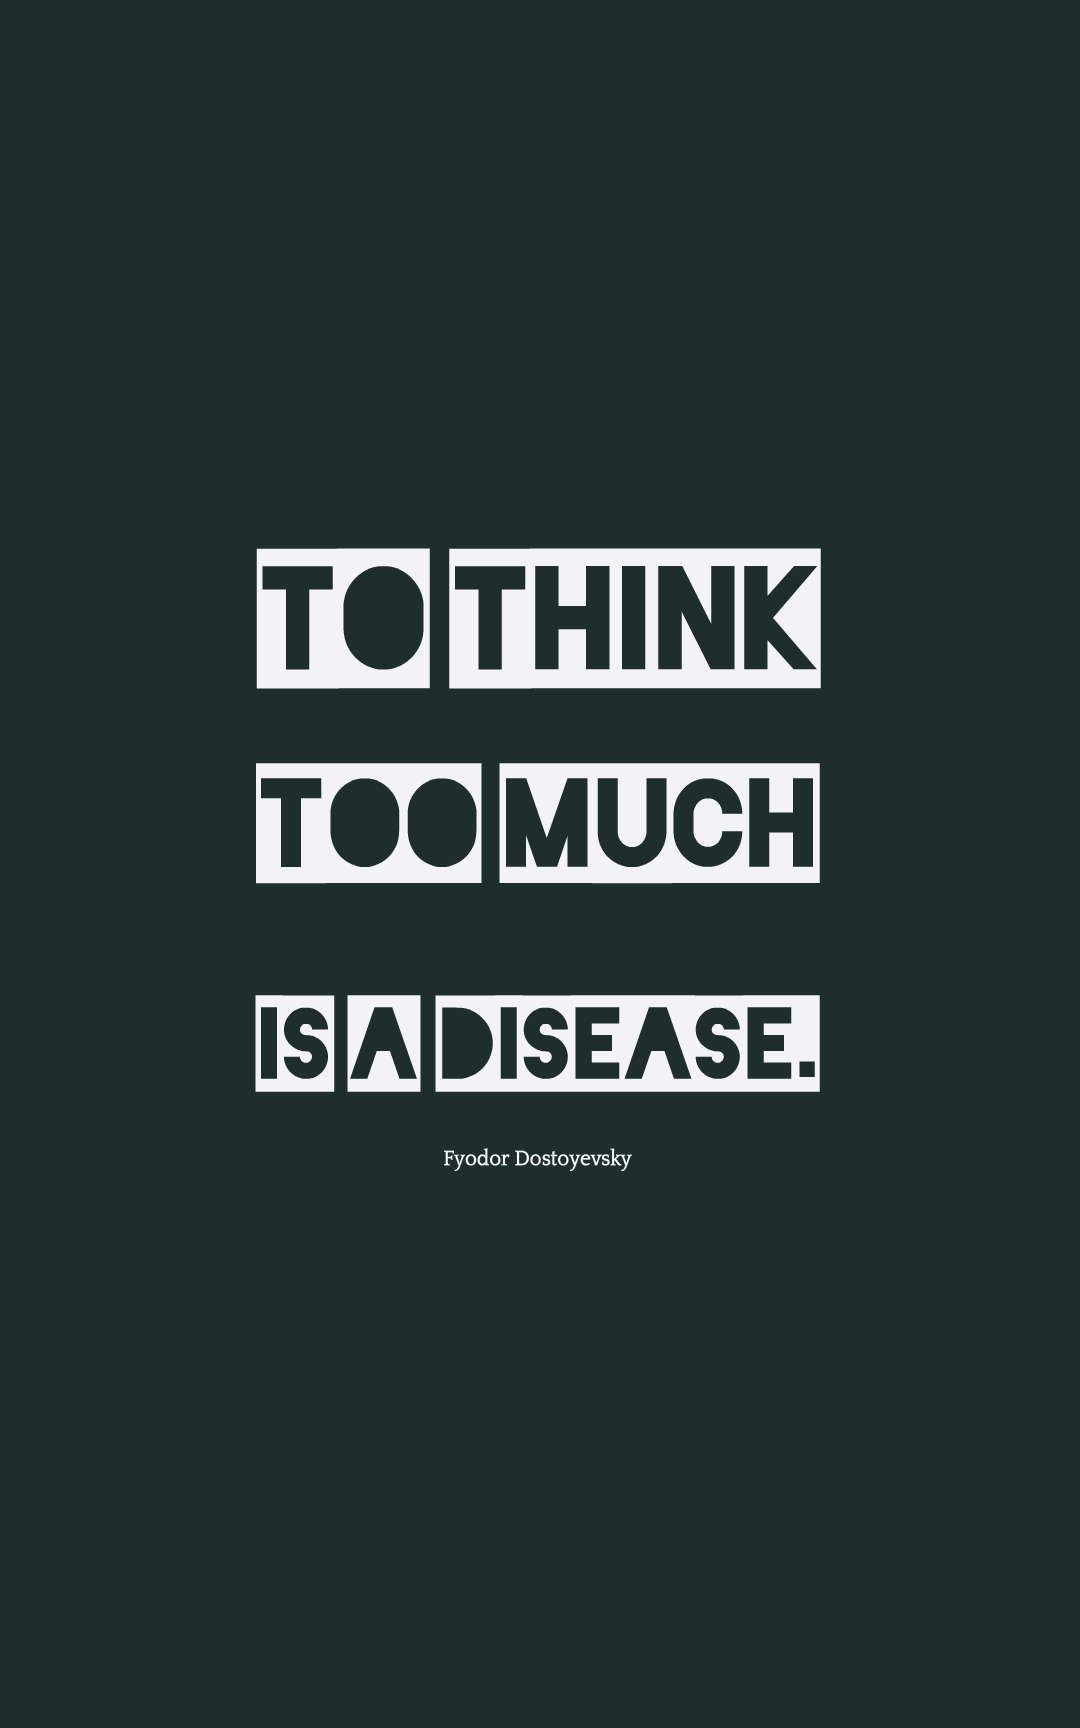 To think too much is a disease.